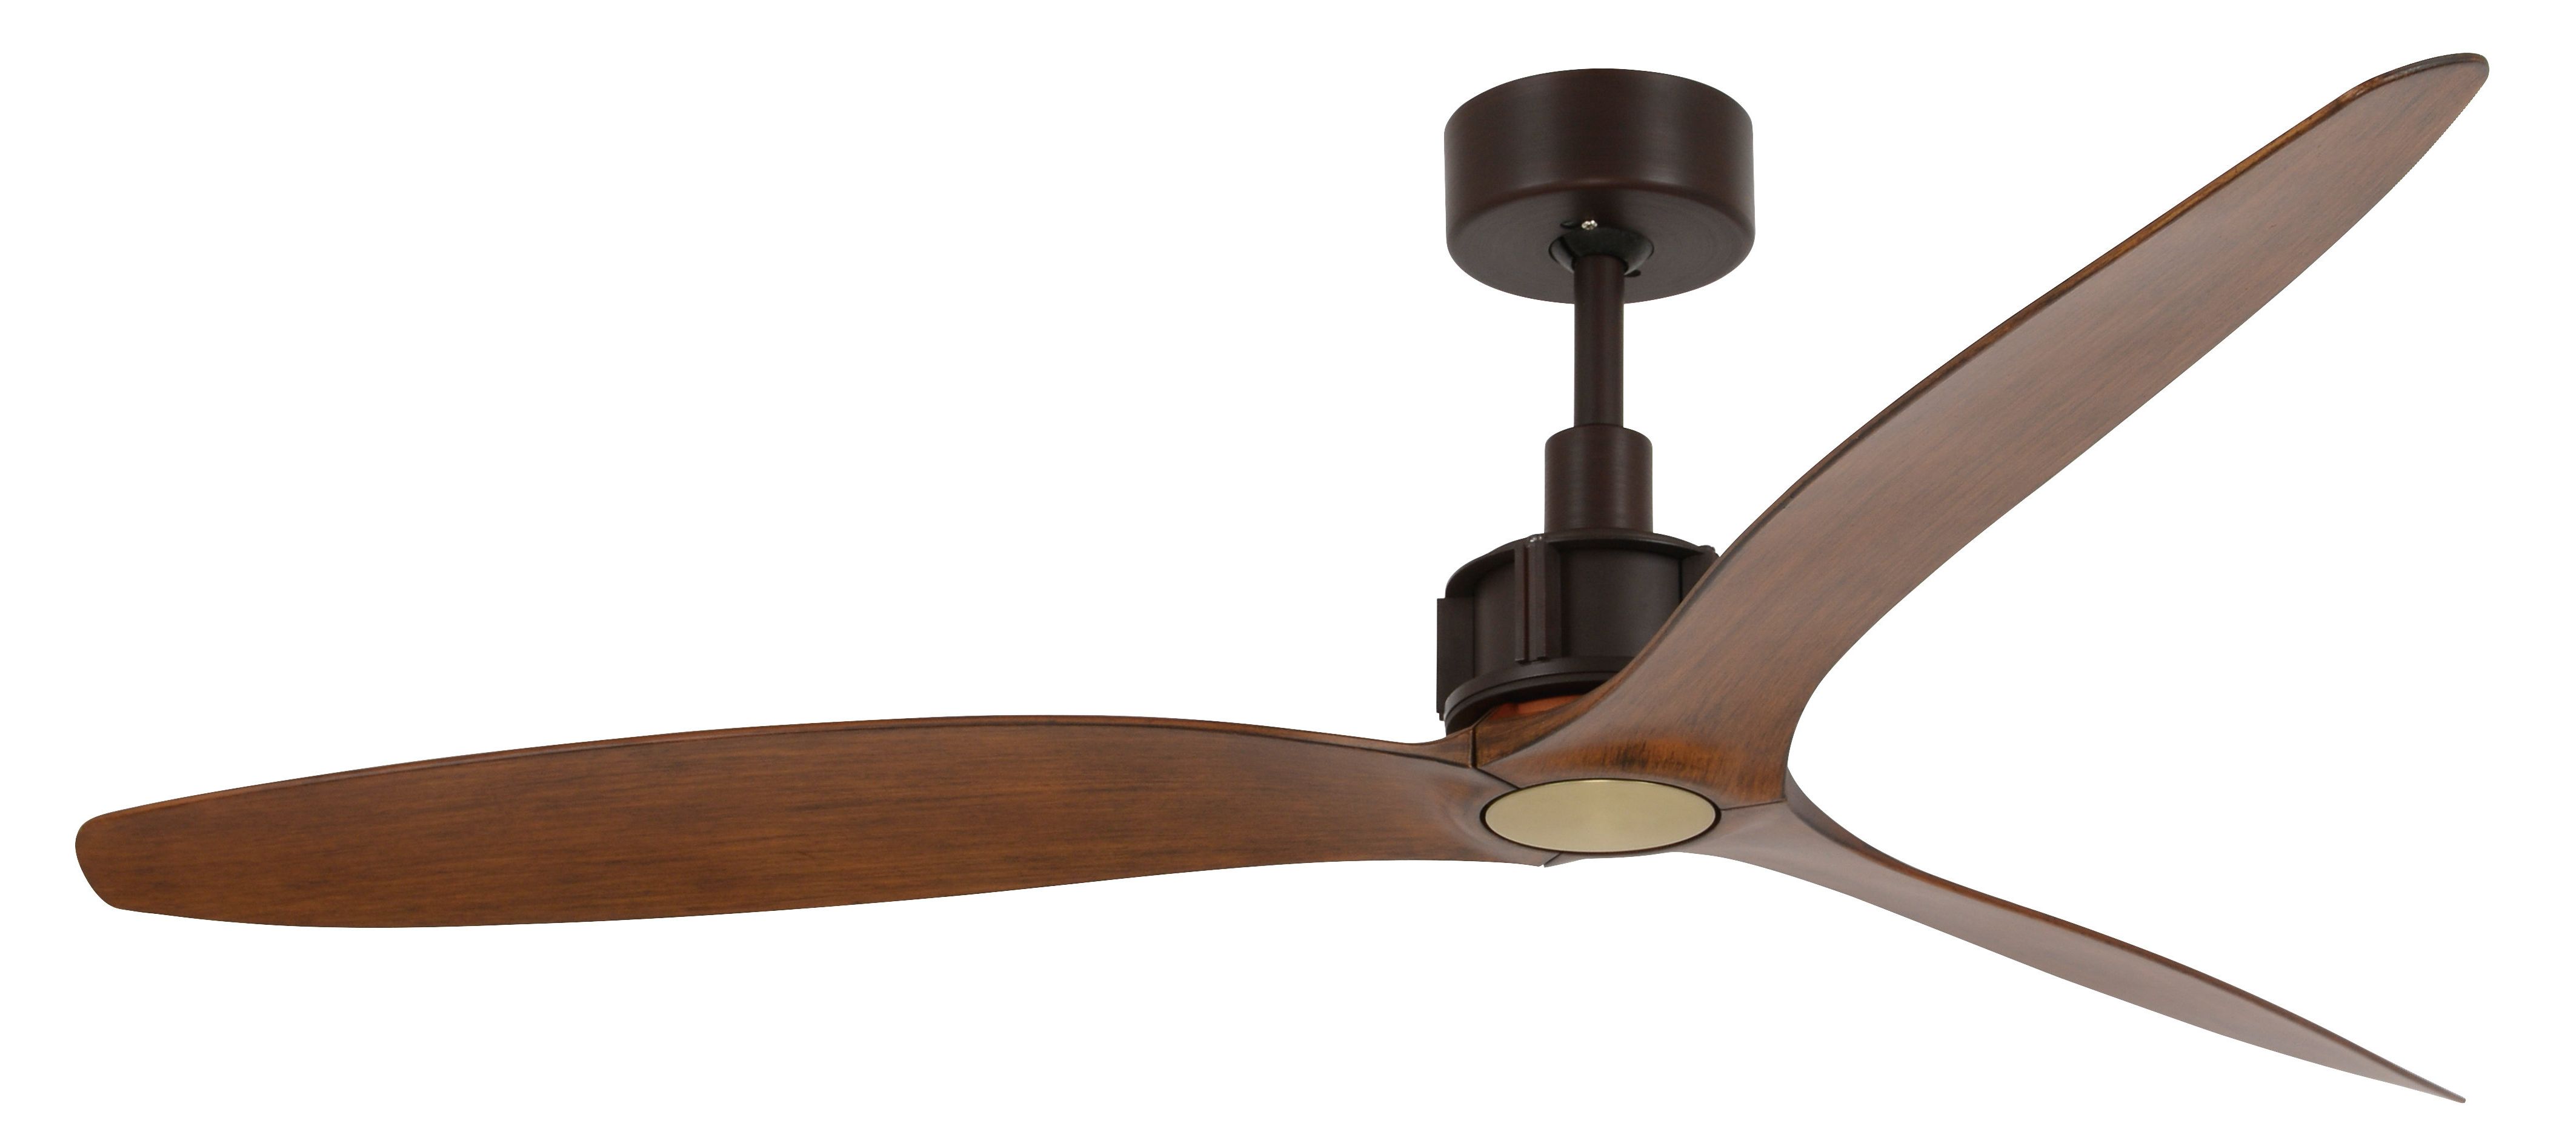 Allmodern Throughout Newest Cranbrook 4 Blade Ceiling Fans (View 7 of 20)